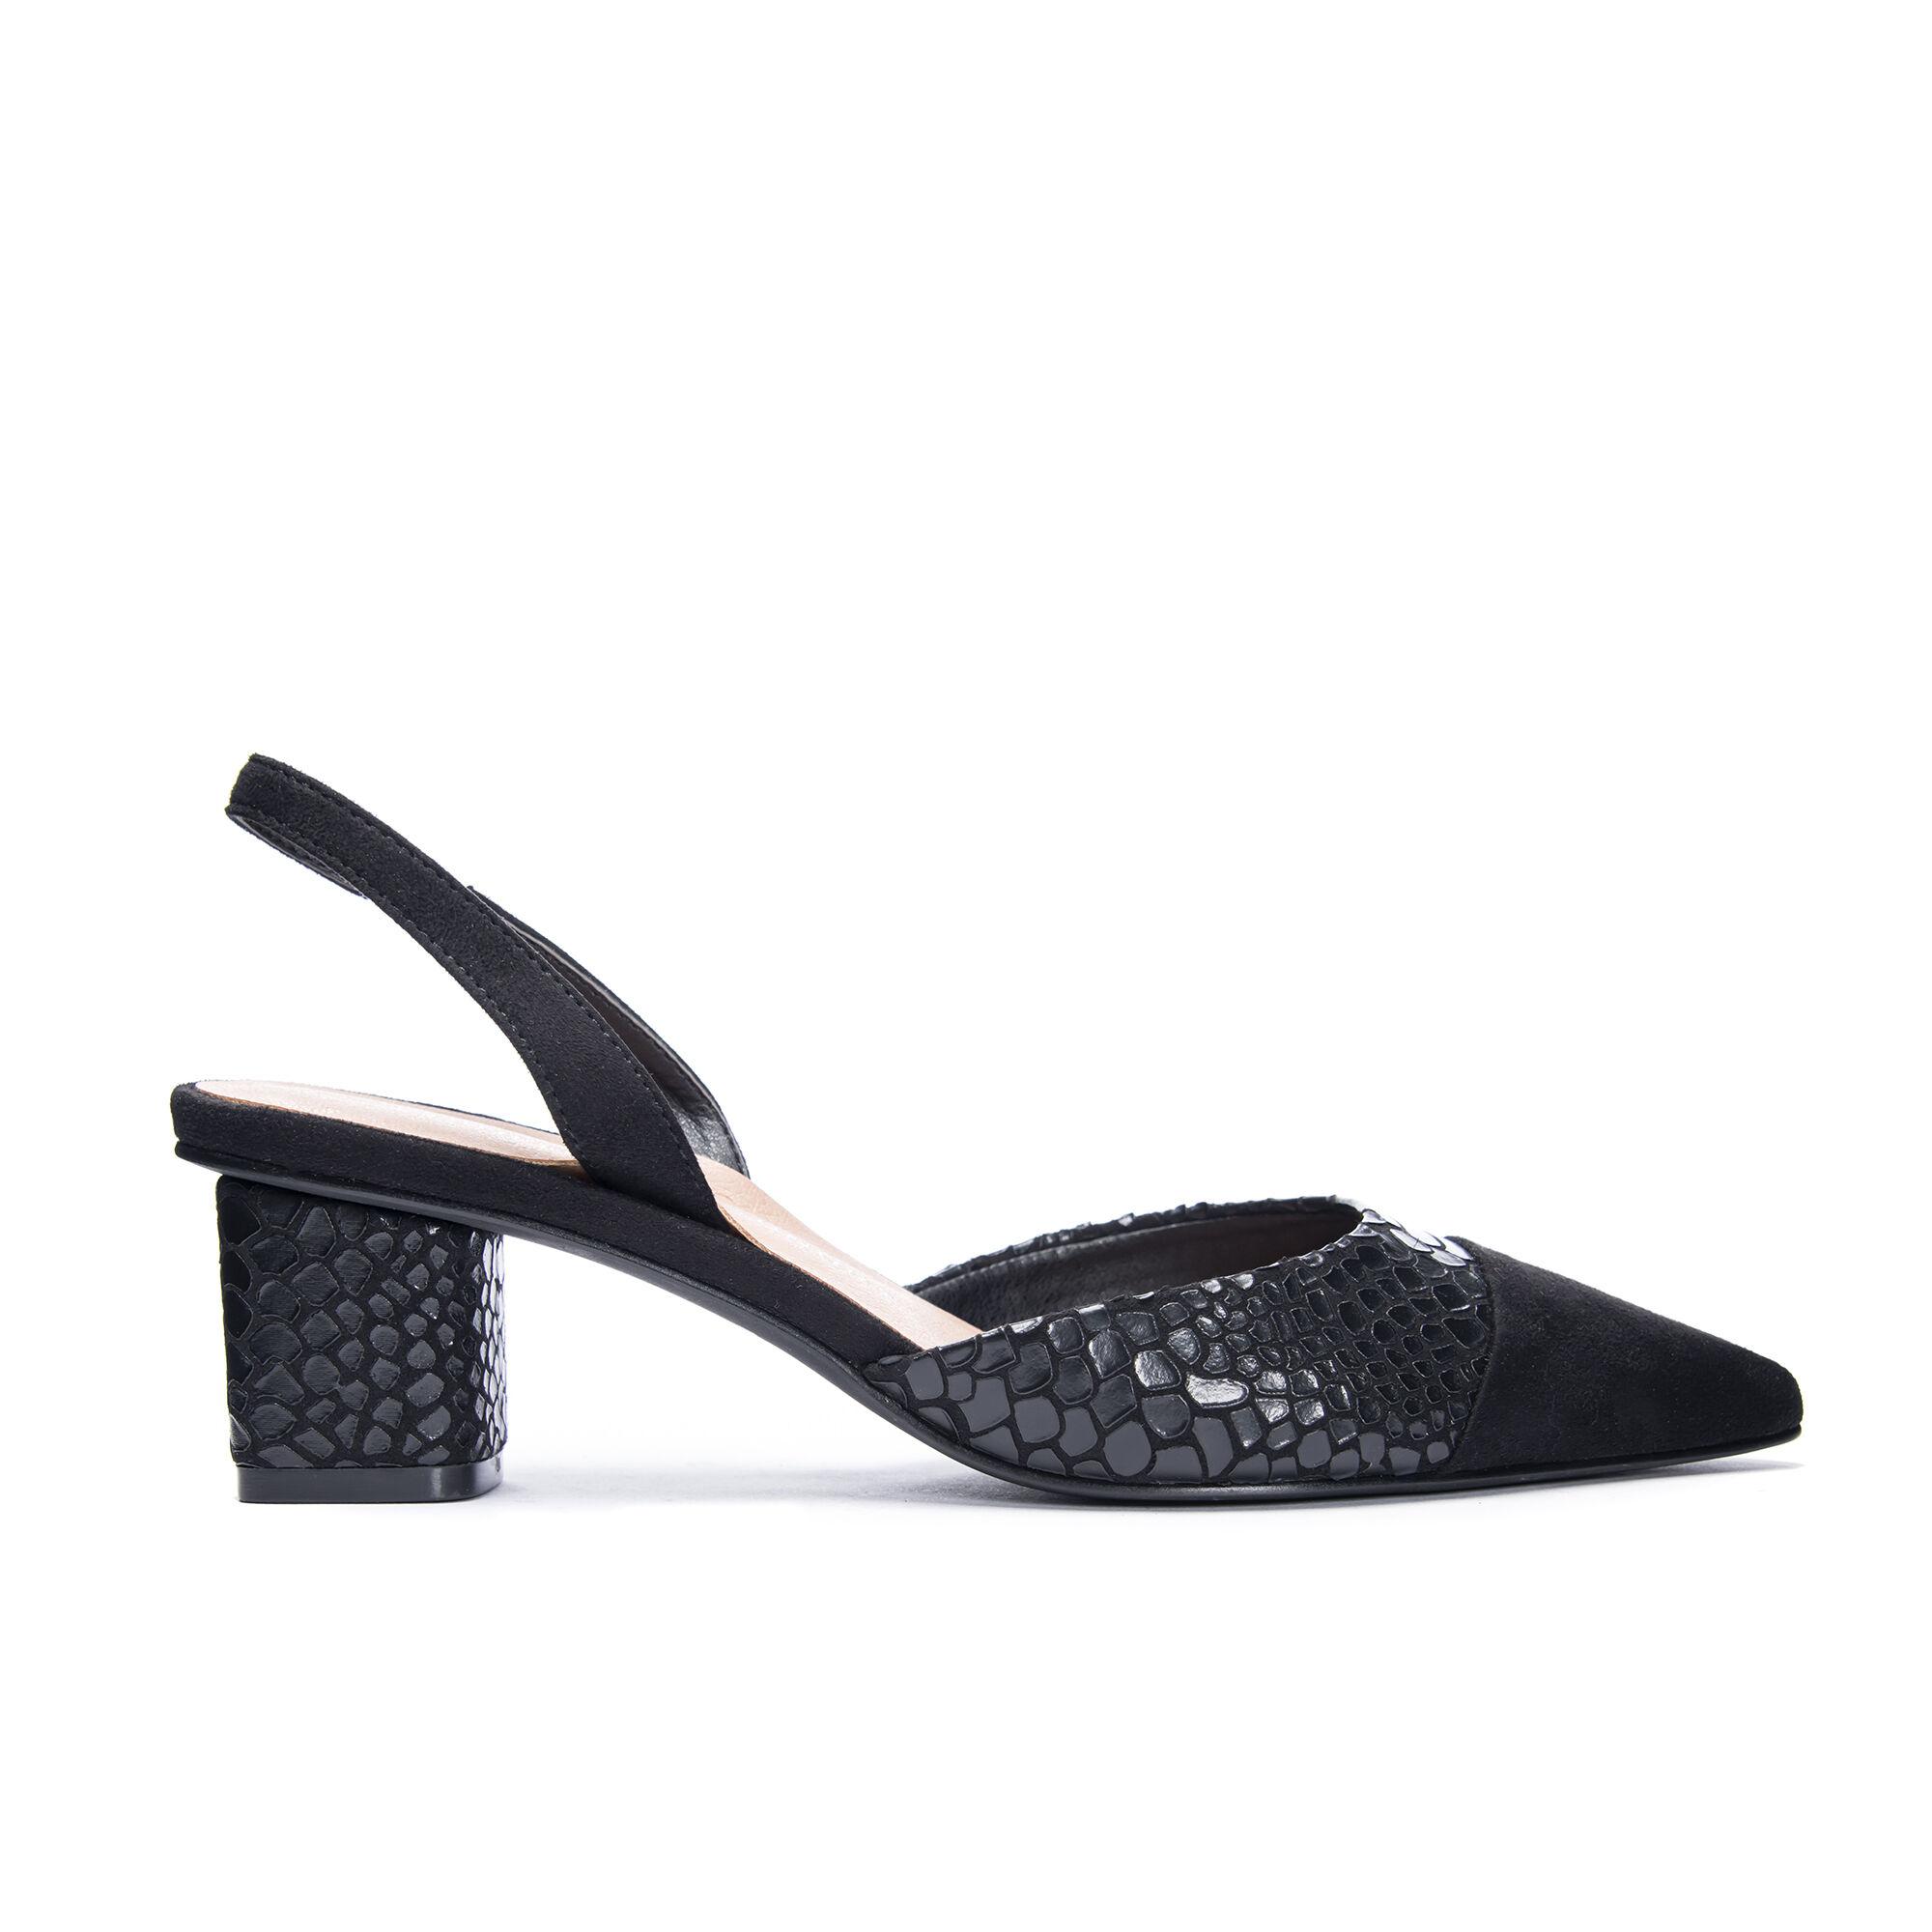 Chinese Laundry Cabella Slingback Pump in Black - Lyst